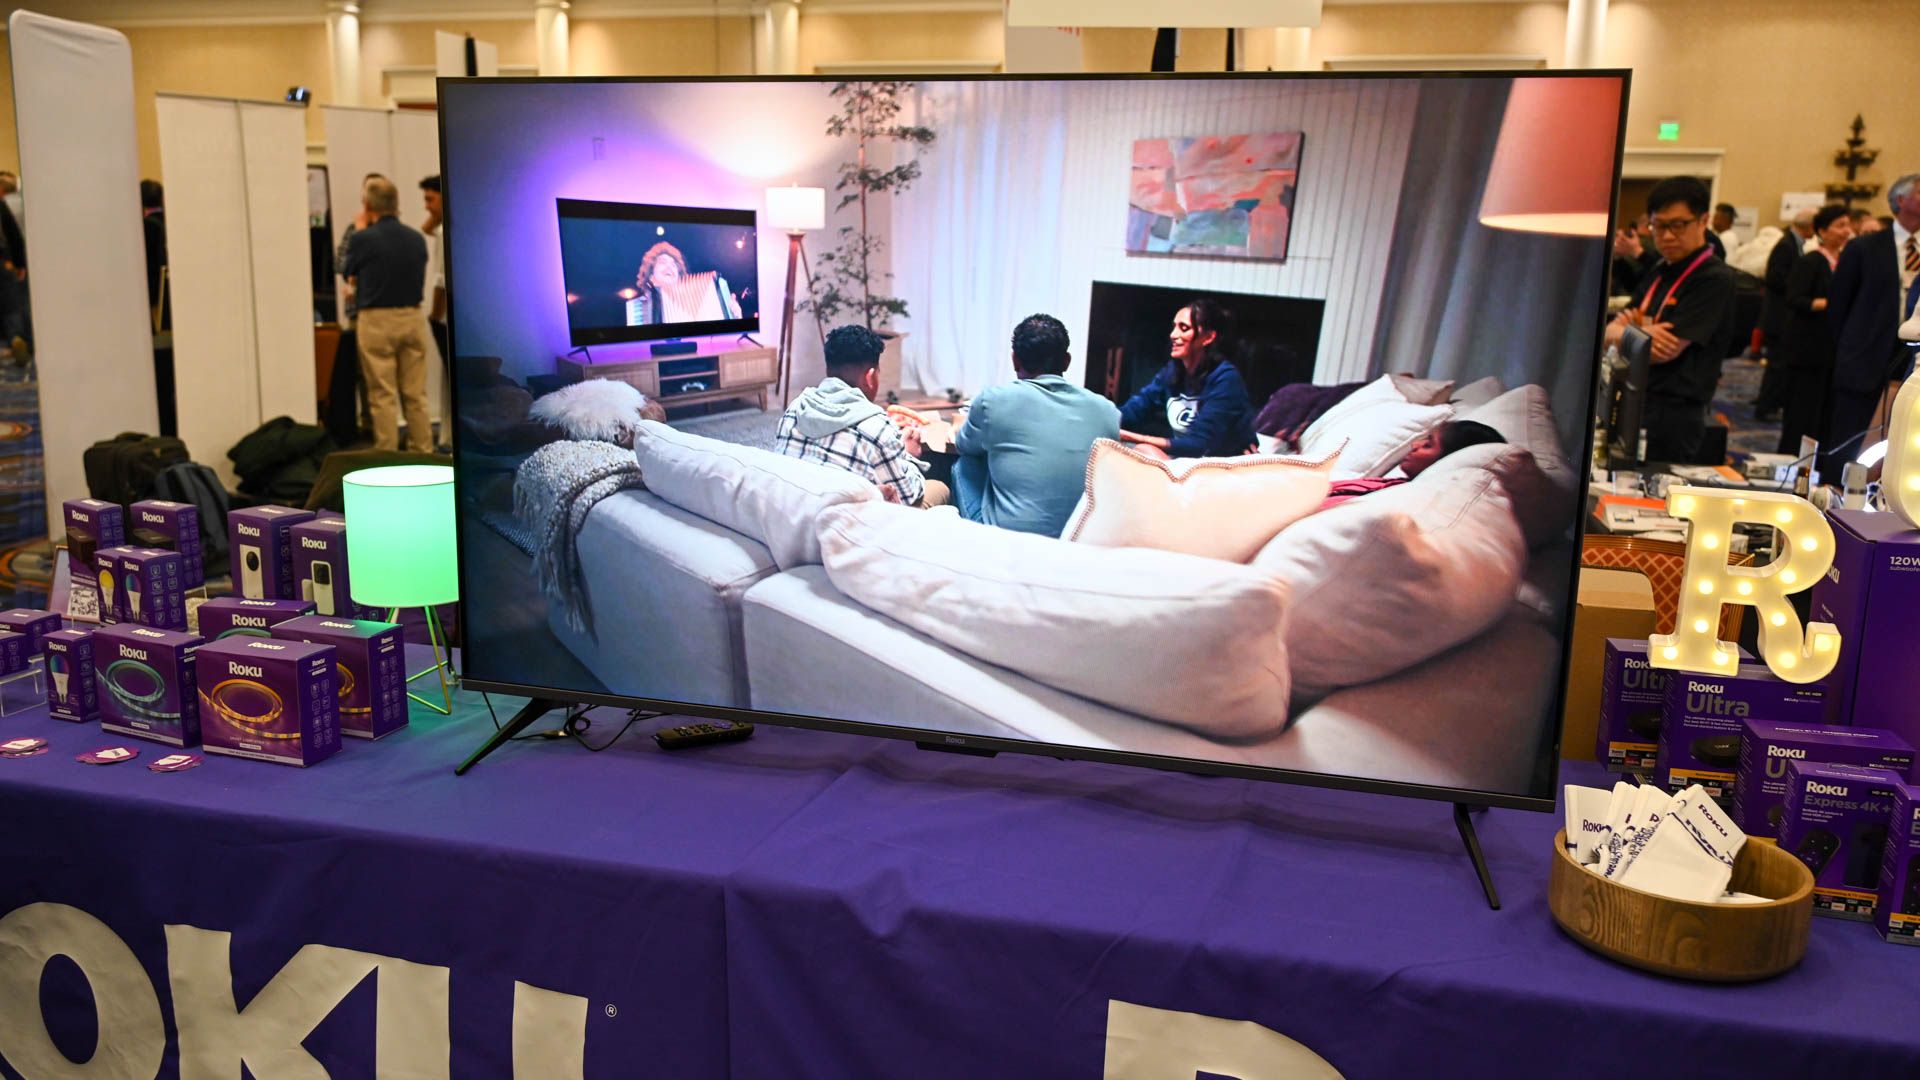 The Roku Select TV on display at CES 2023.